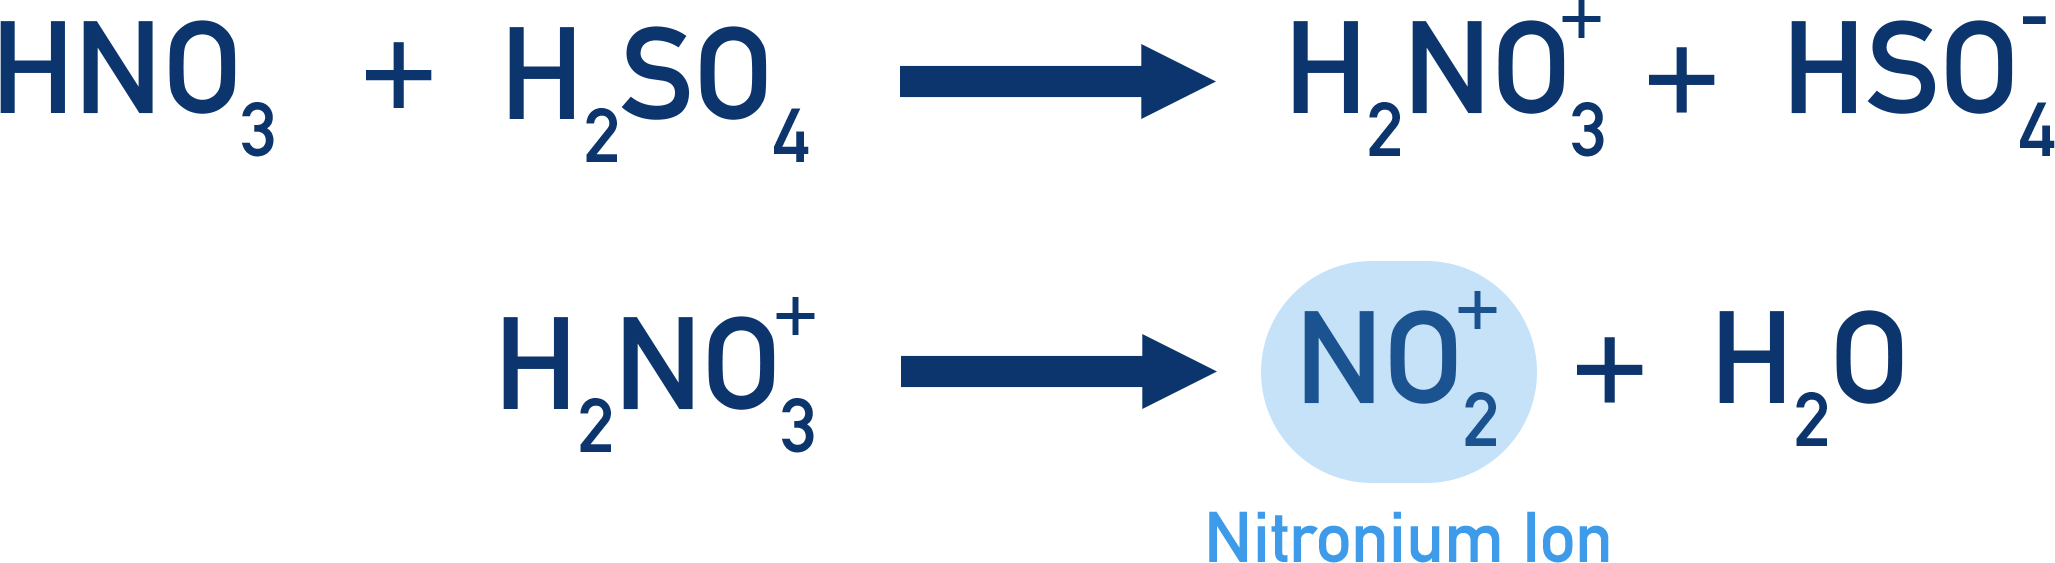 nitric acid + sulfuric acid forming nitronium ion HNO3 + H2SO4 forms H2NO3+ + HSO4- NO2+